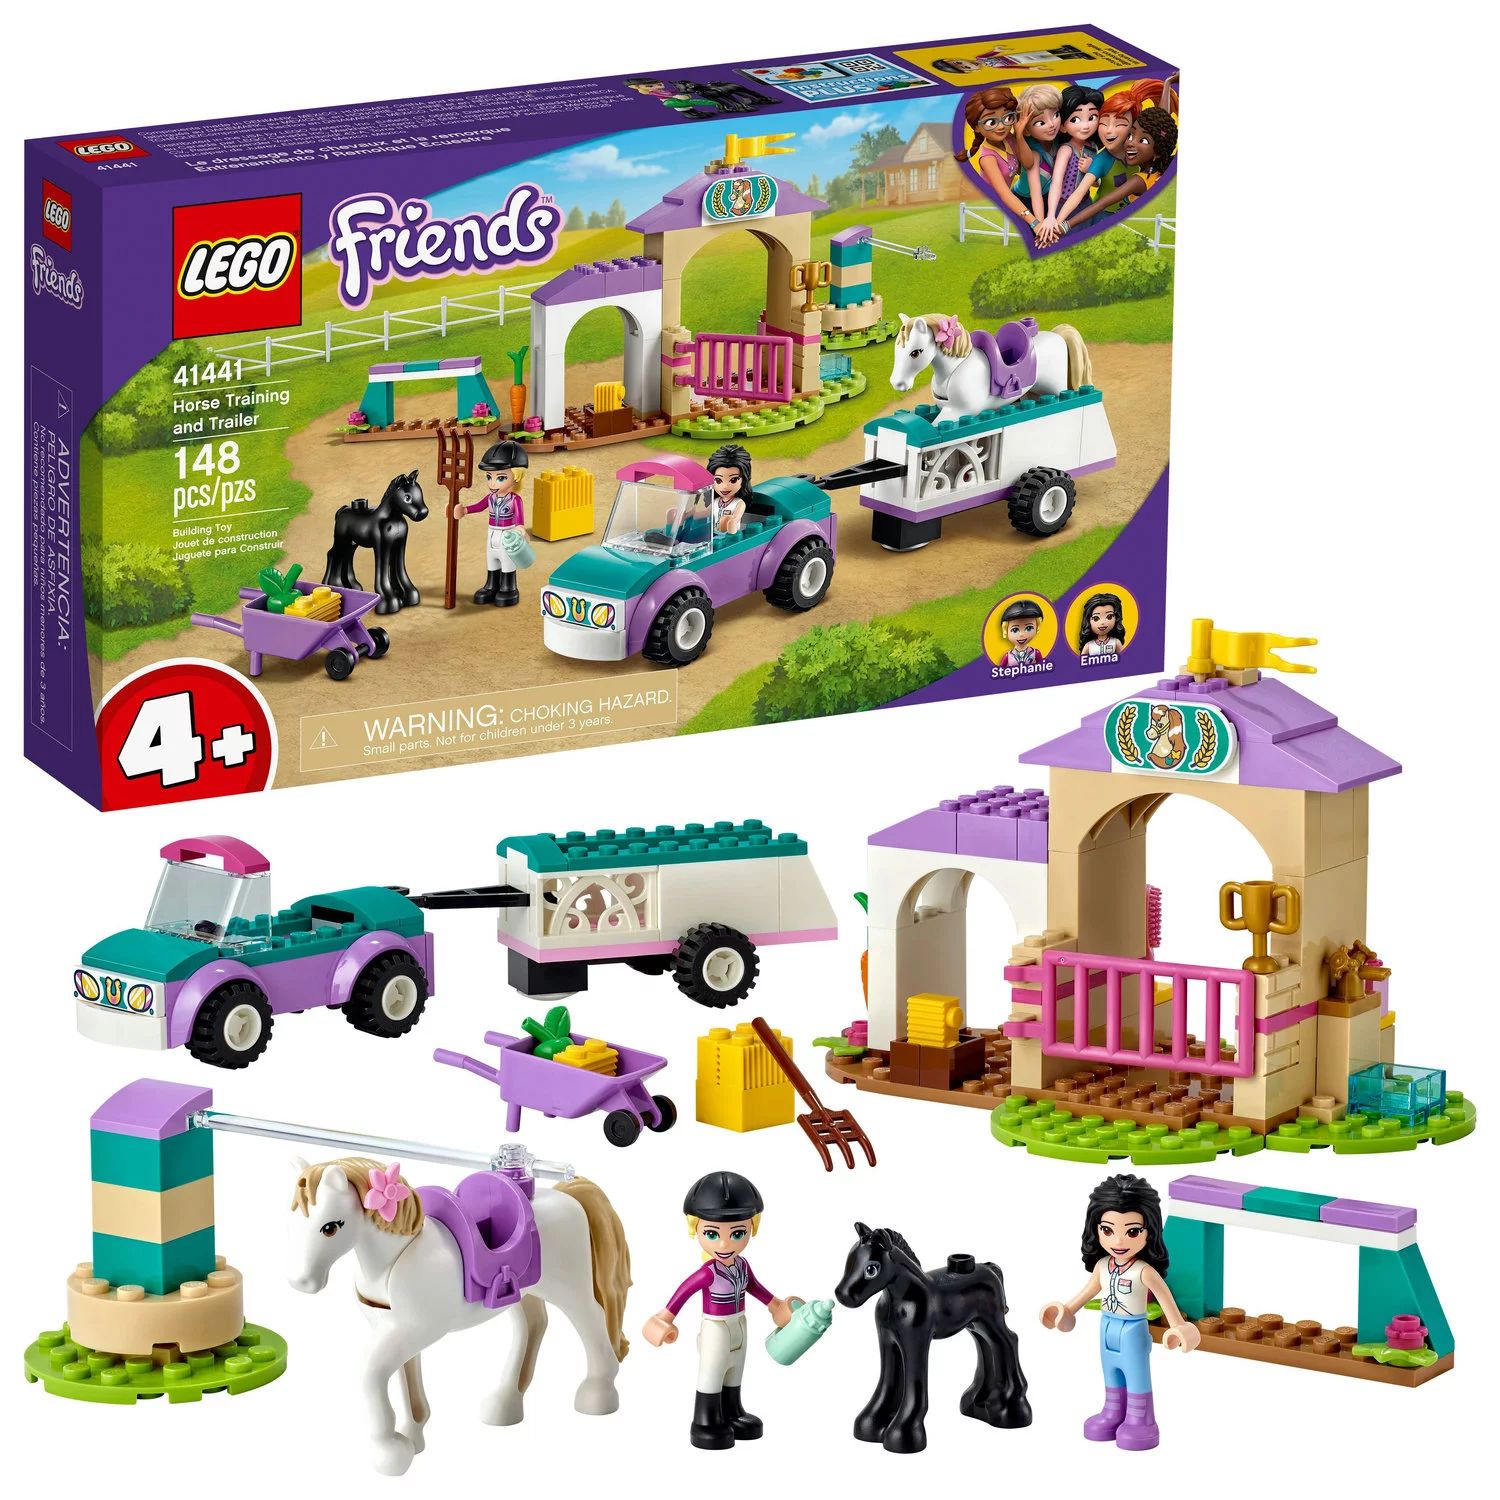 LEGO Friends Horse Training and Trailer 41441 Building Toy; With LEGO Friends Stephanie and Emma ... | Walmart (US)